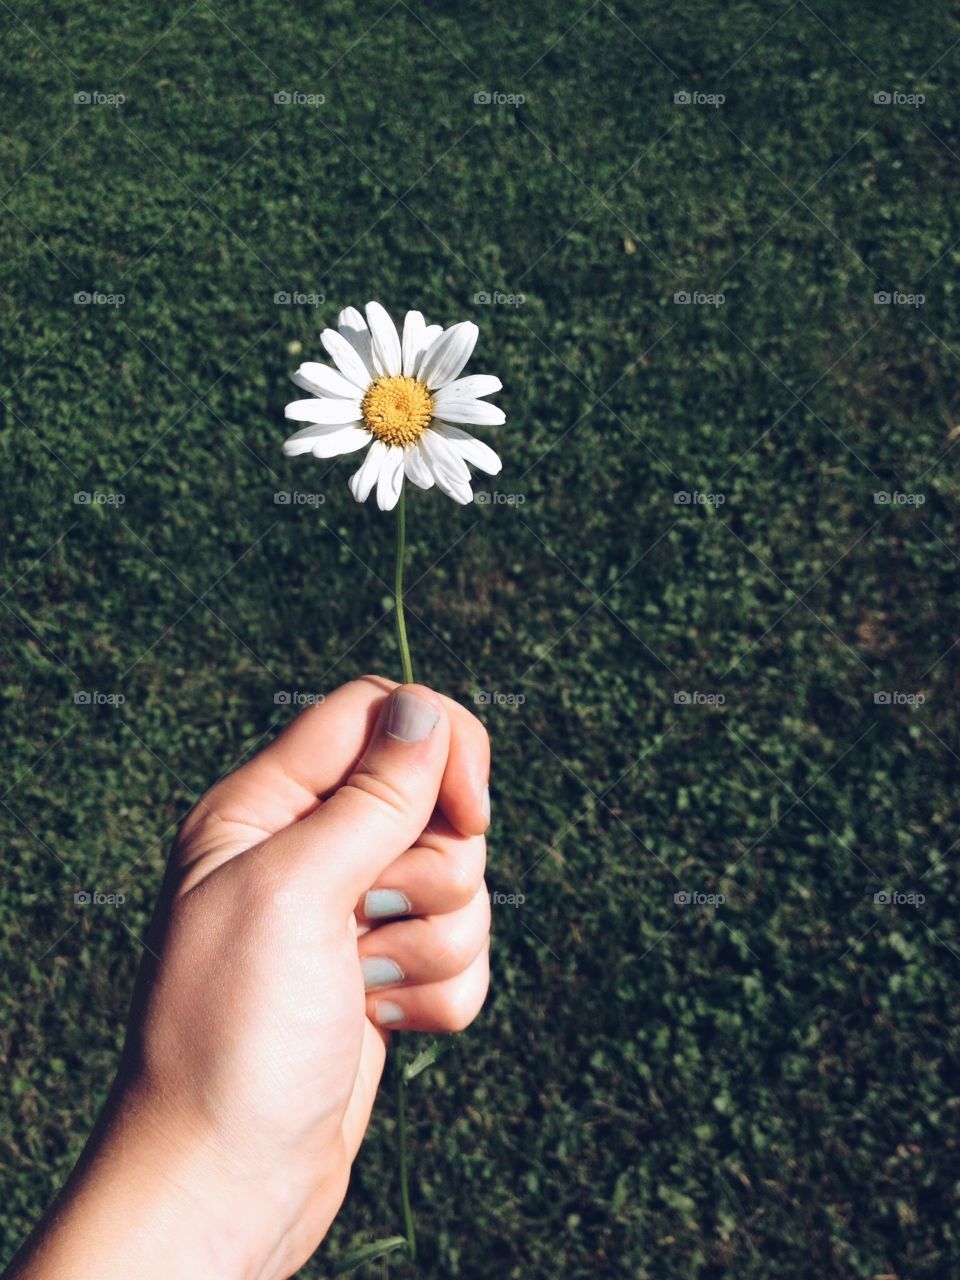 A person holding daisy flower